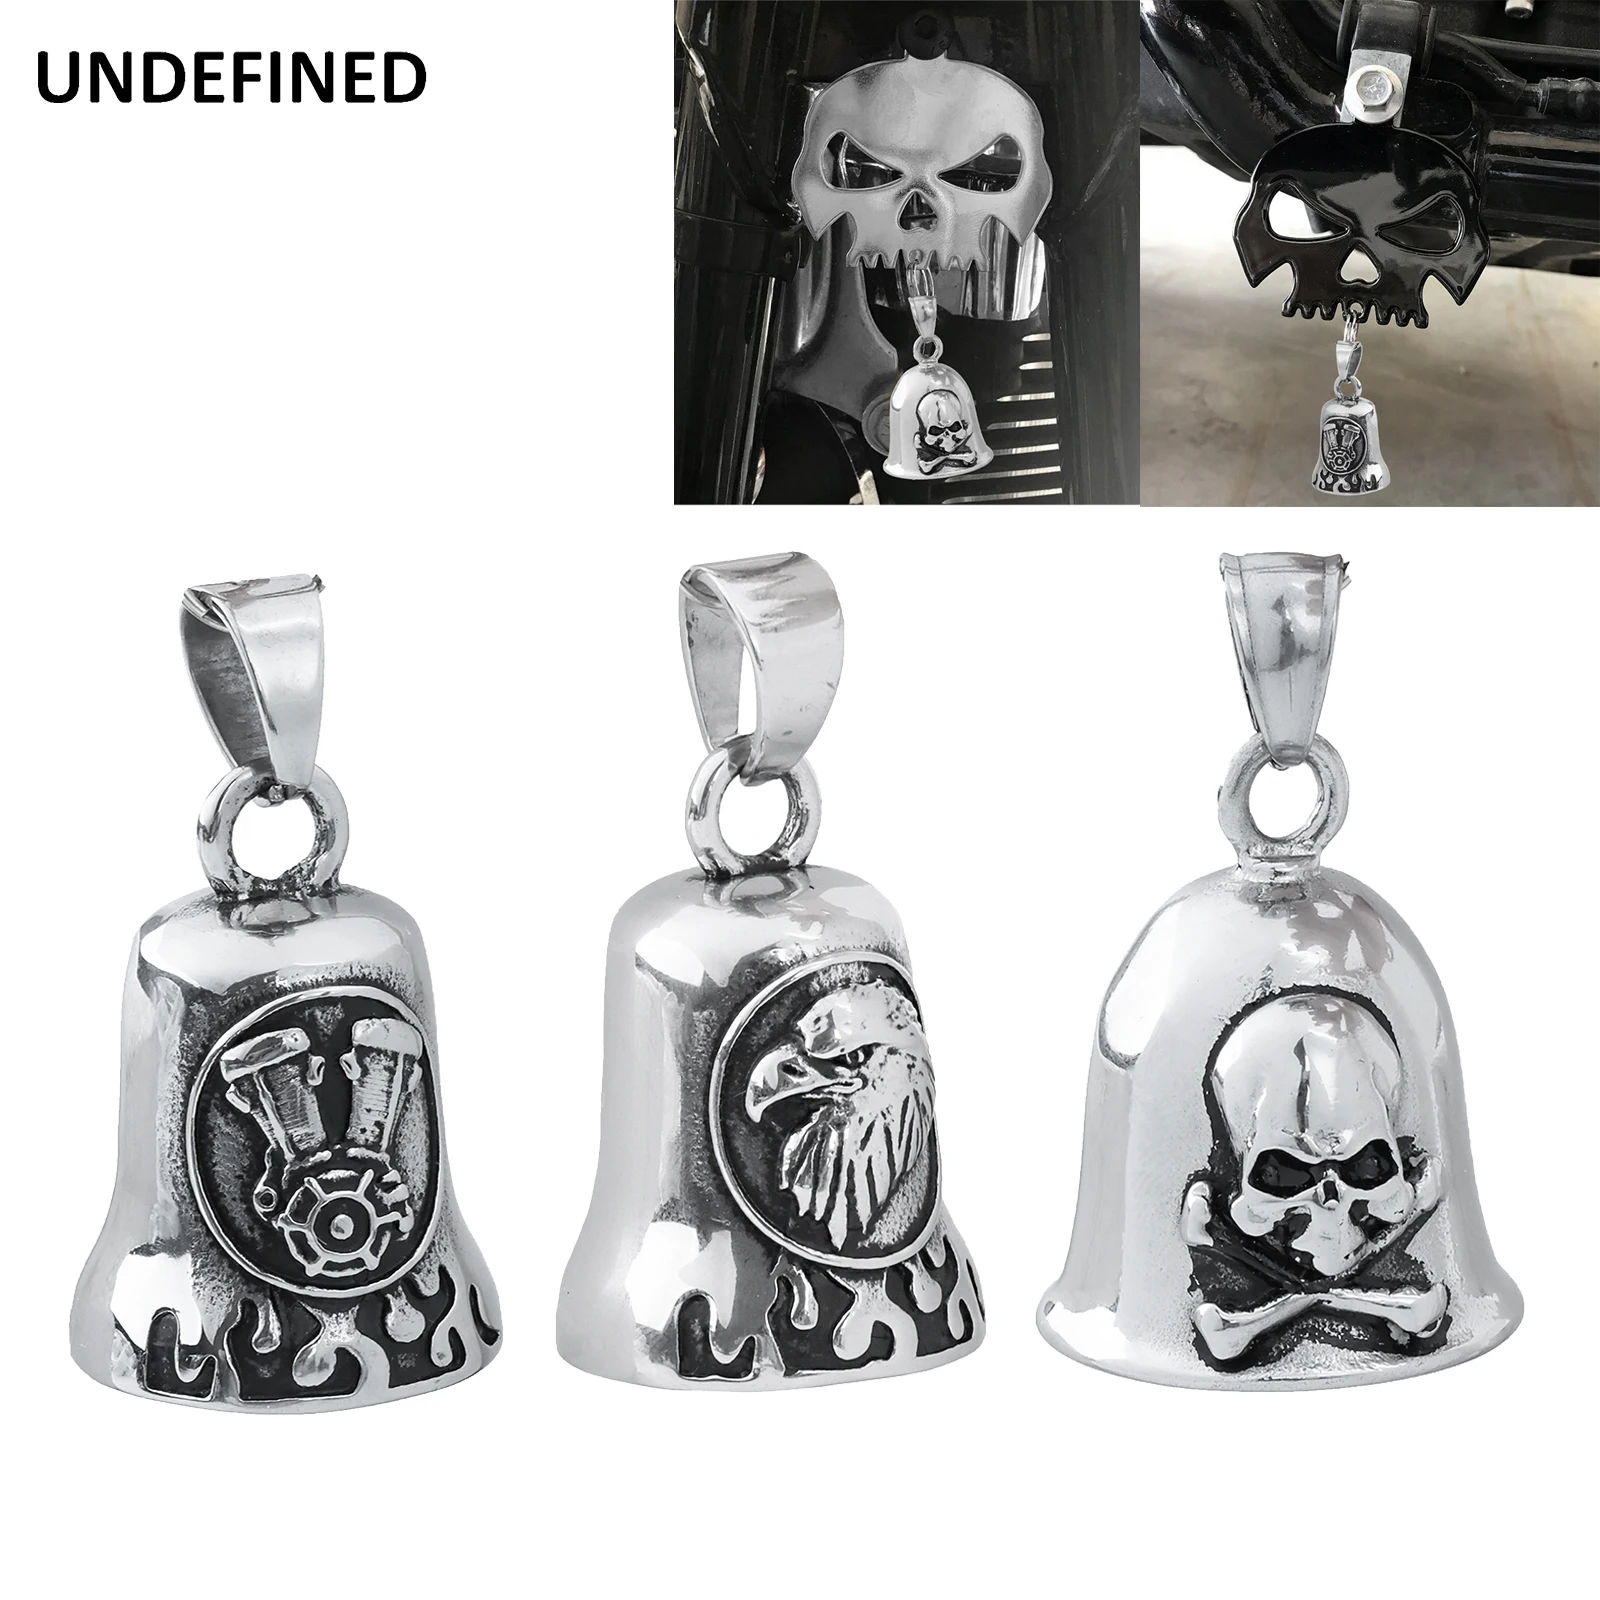 

Skull Eagle Motorcycle Bell Stainlesss Steel Cool Biker Guard Bell for Harley Indian Chief Dyna Softail Fatboy Bobber Universal